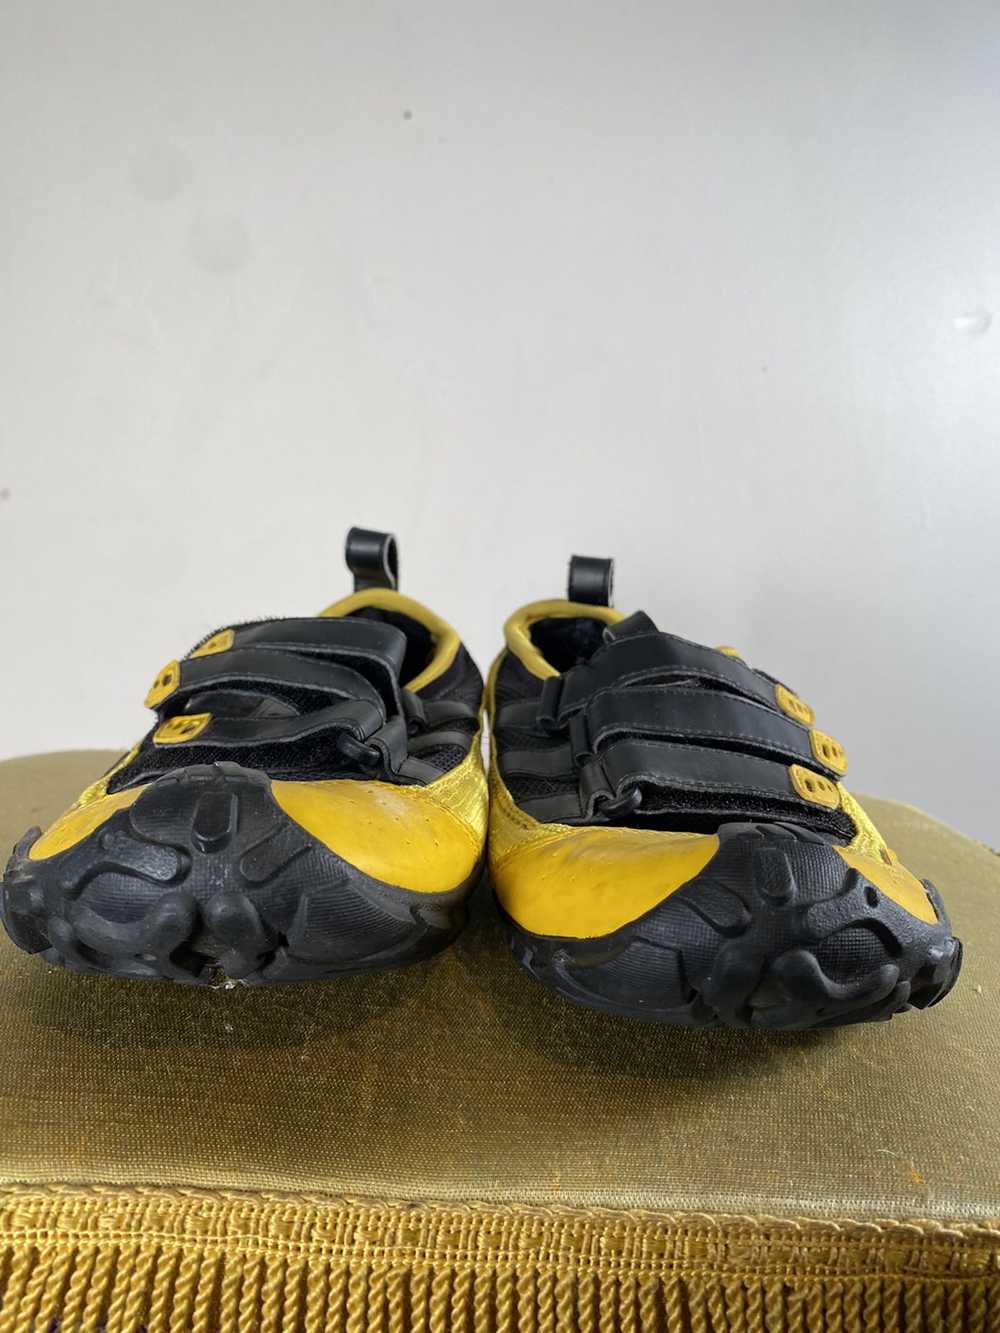 Vintage Velcro Water Shoes - image 11